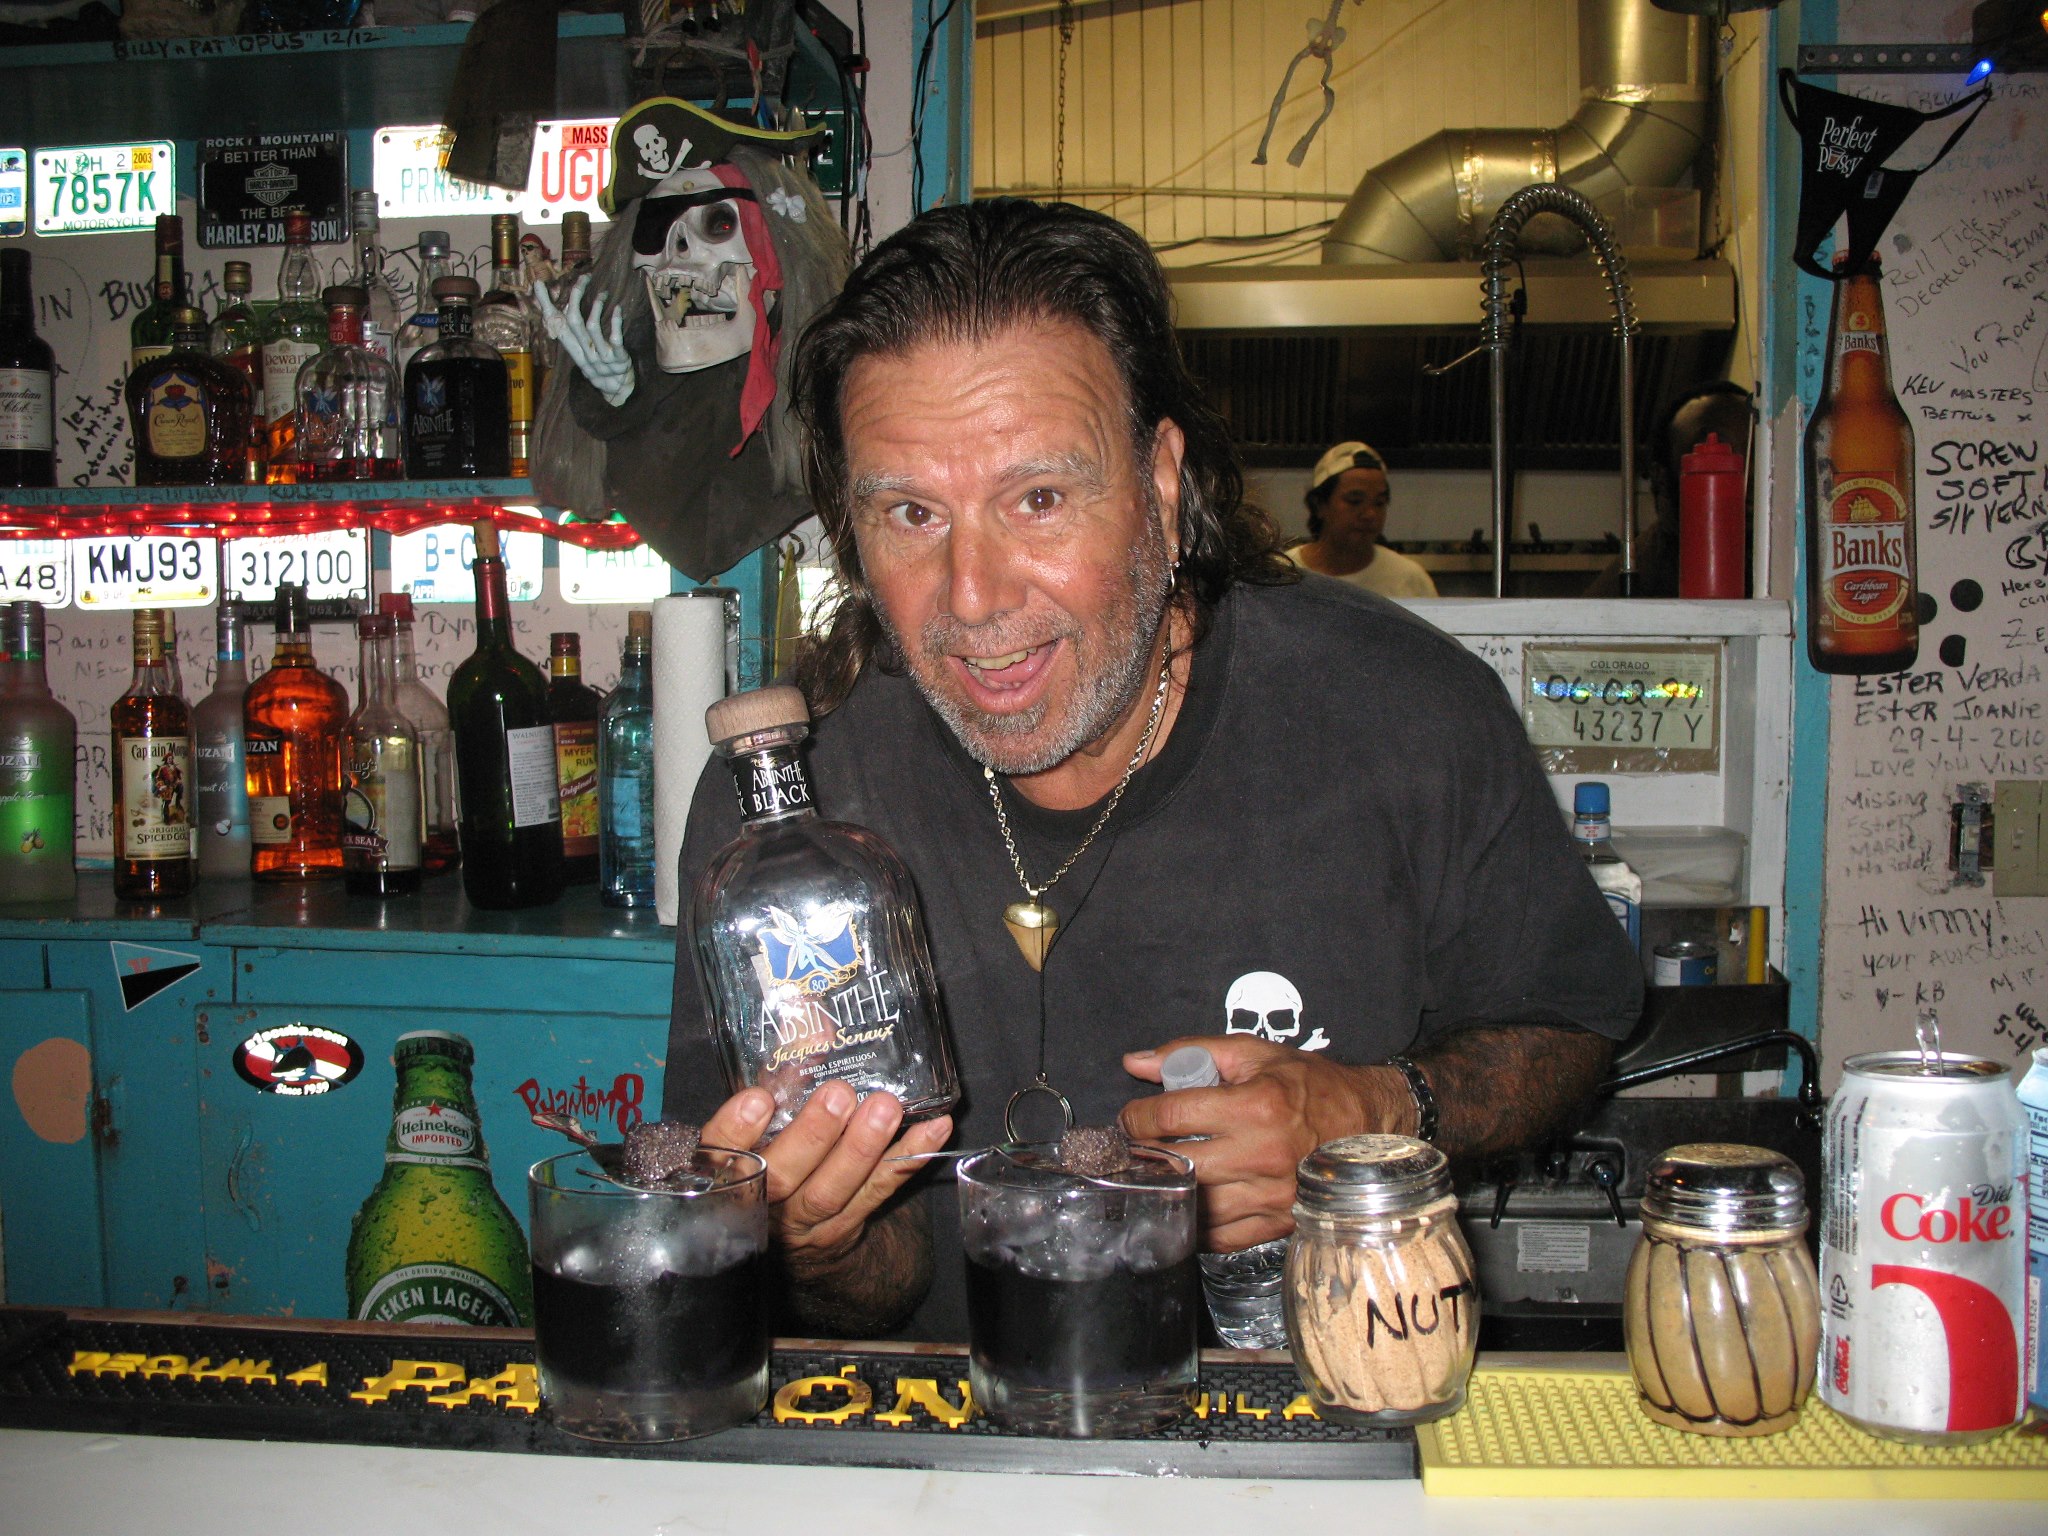 Have a drink with our bartender Vinnie